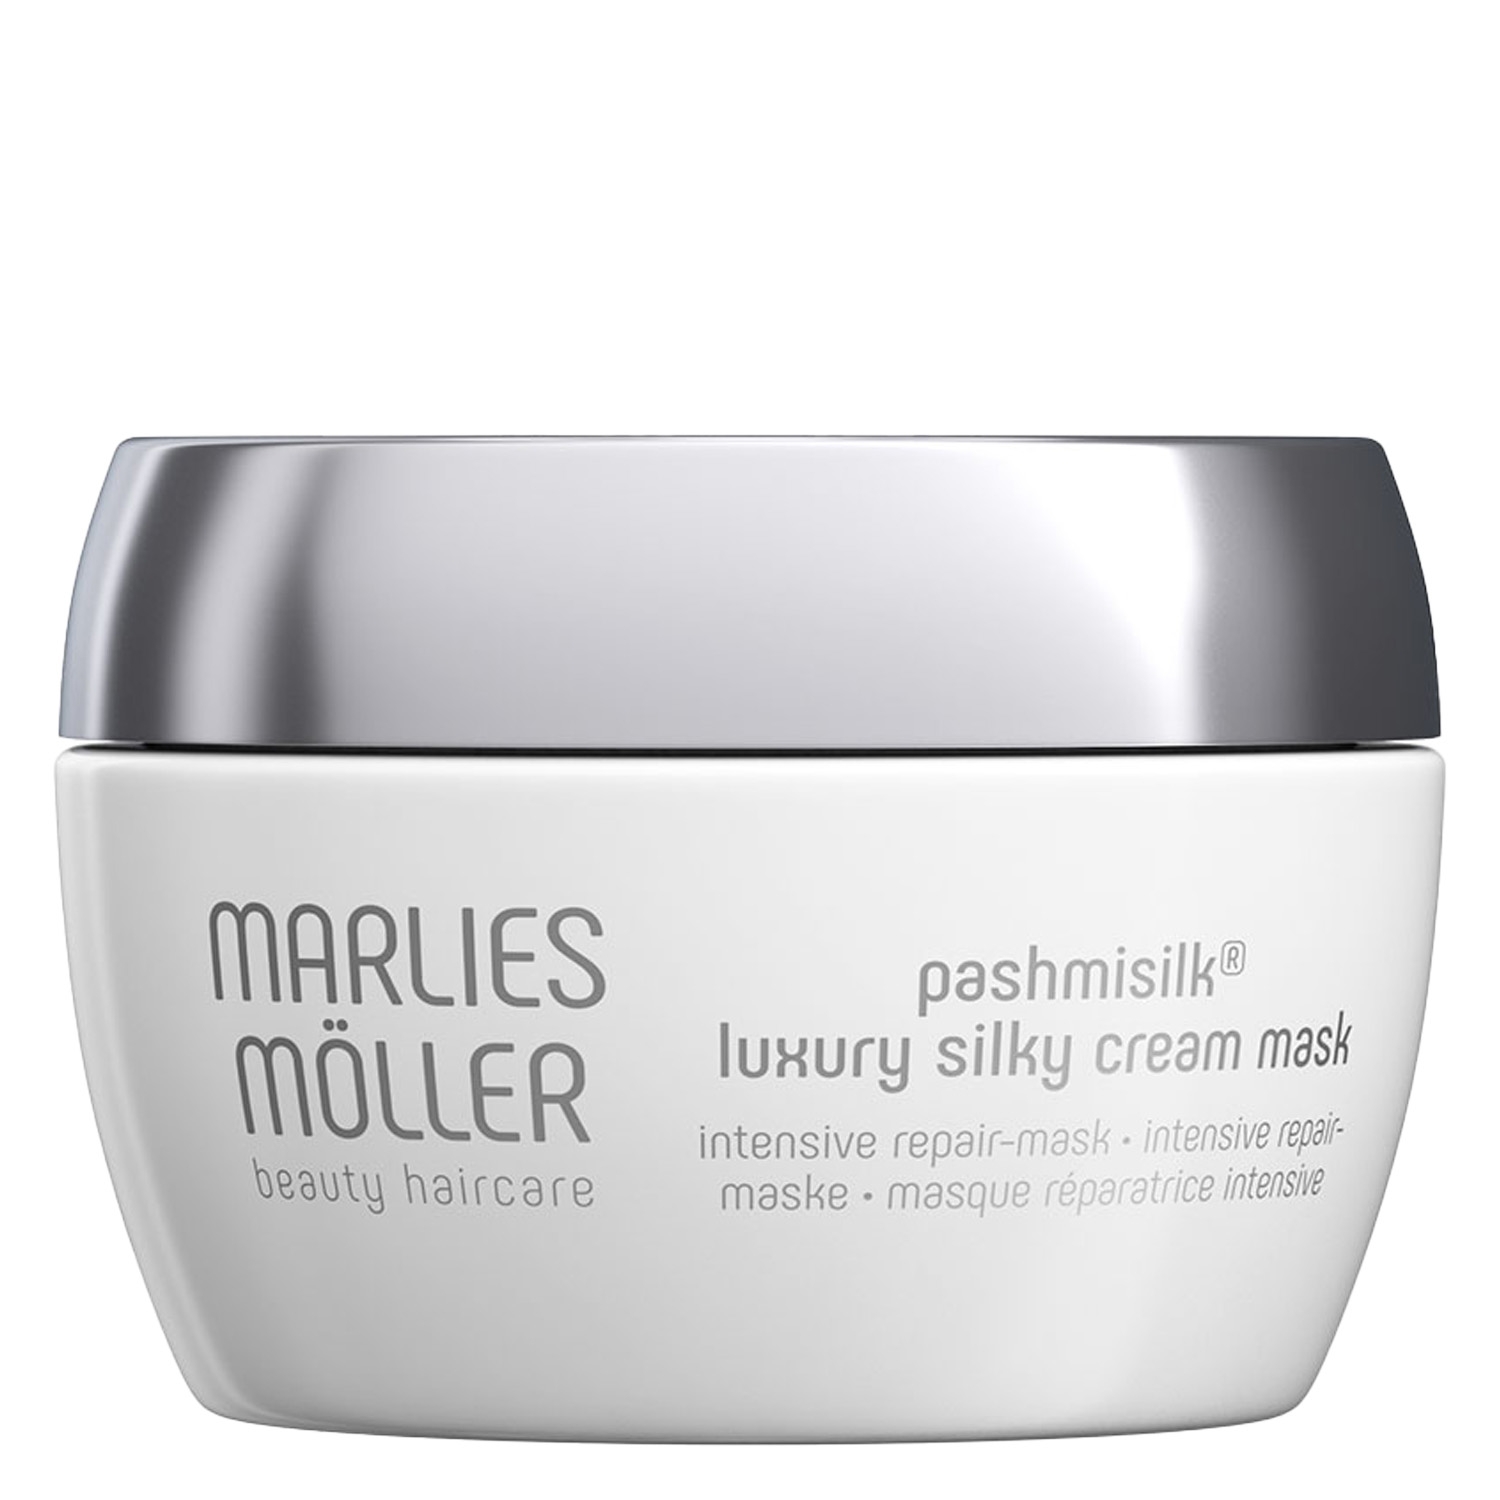 Product image from Pashmisilk - Silky Cream Mask